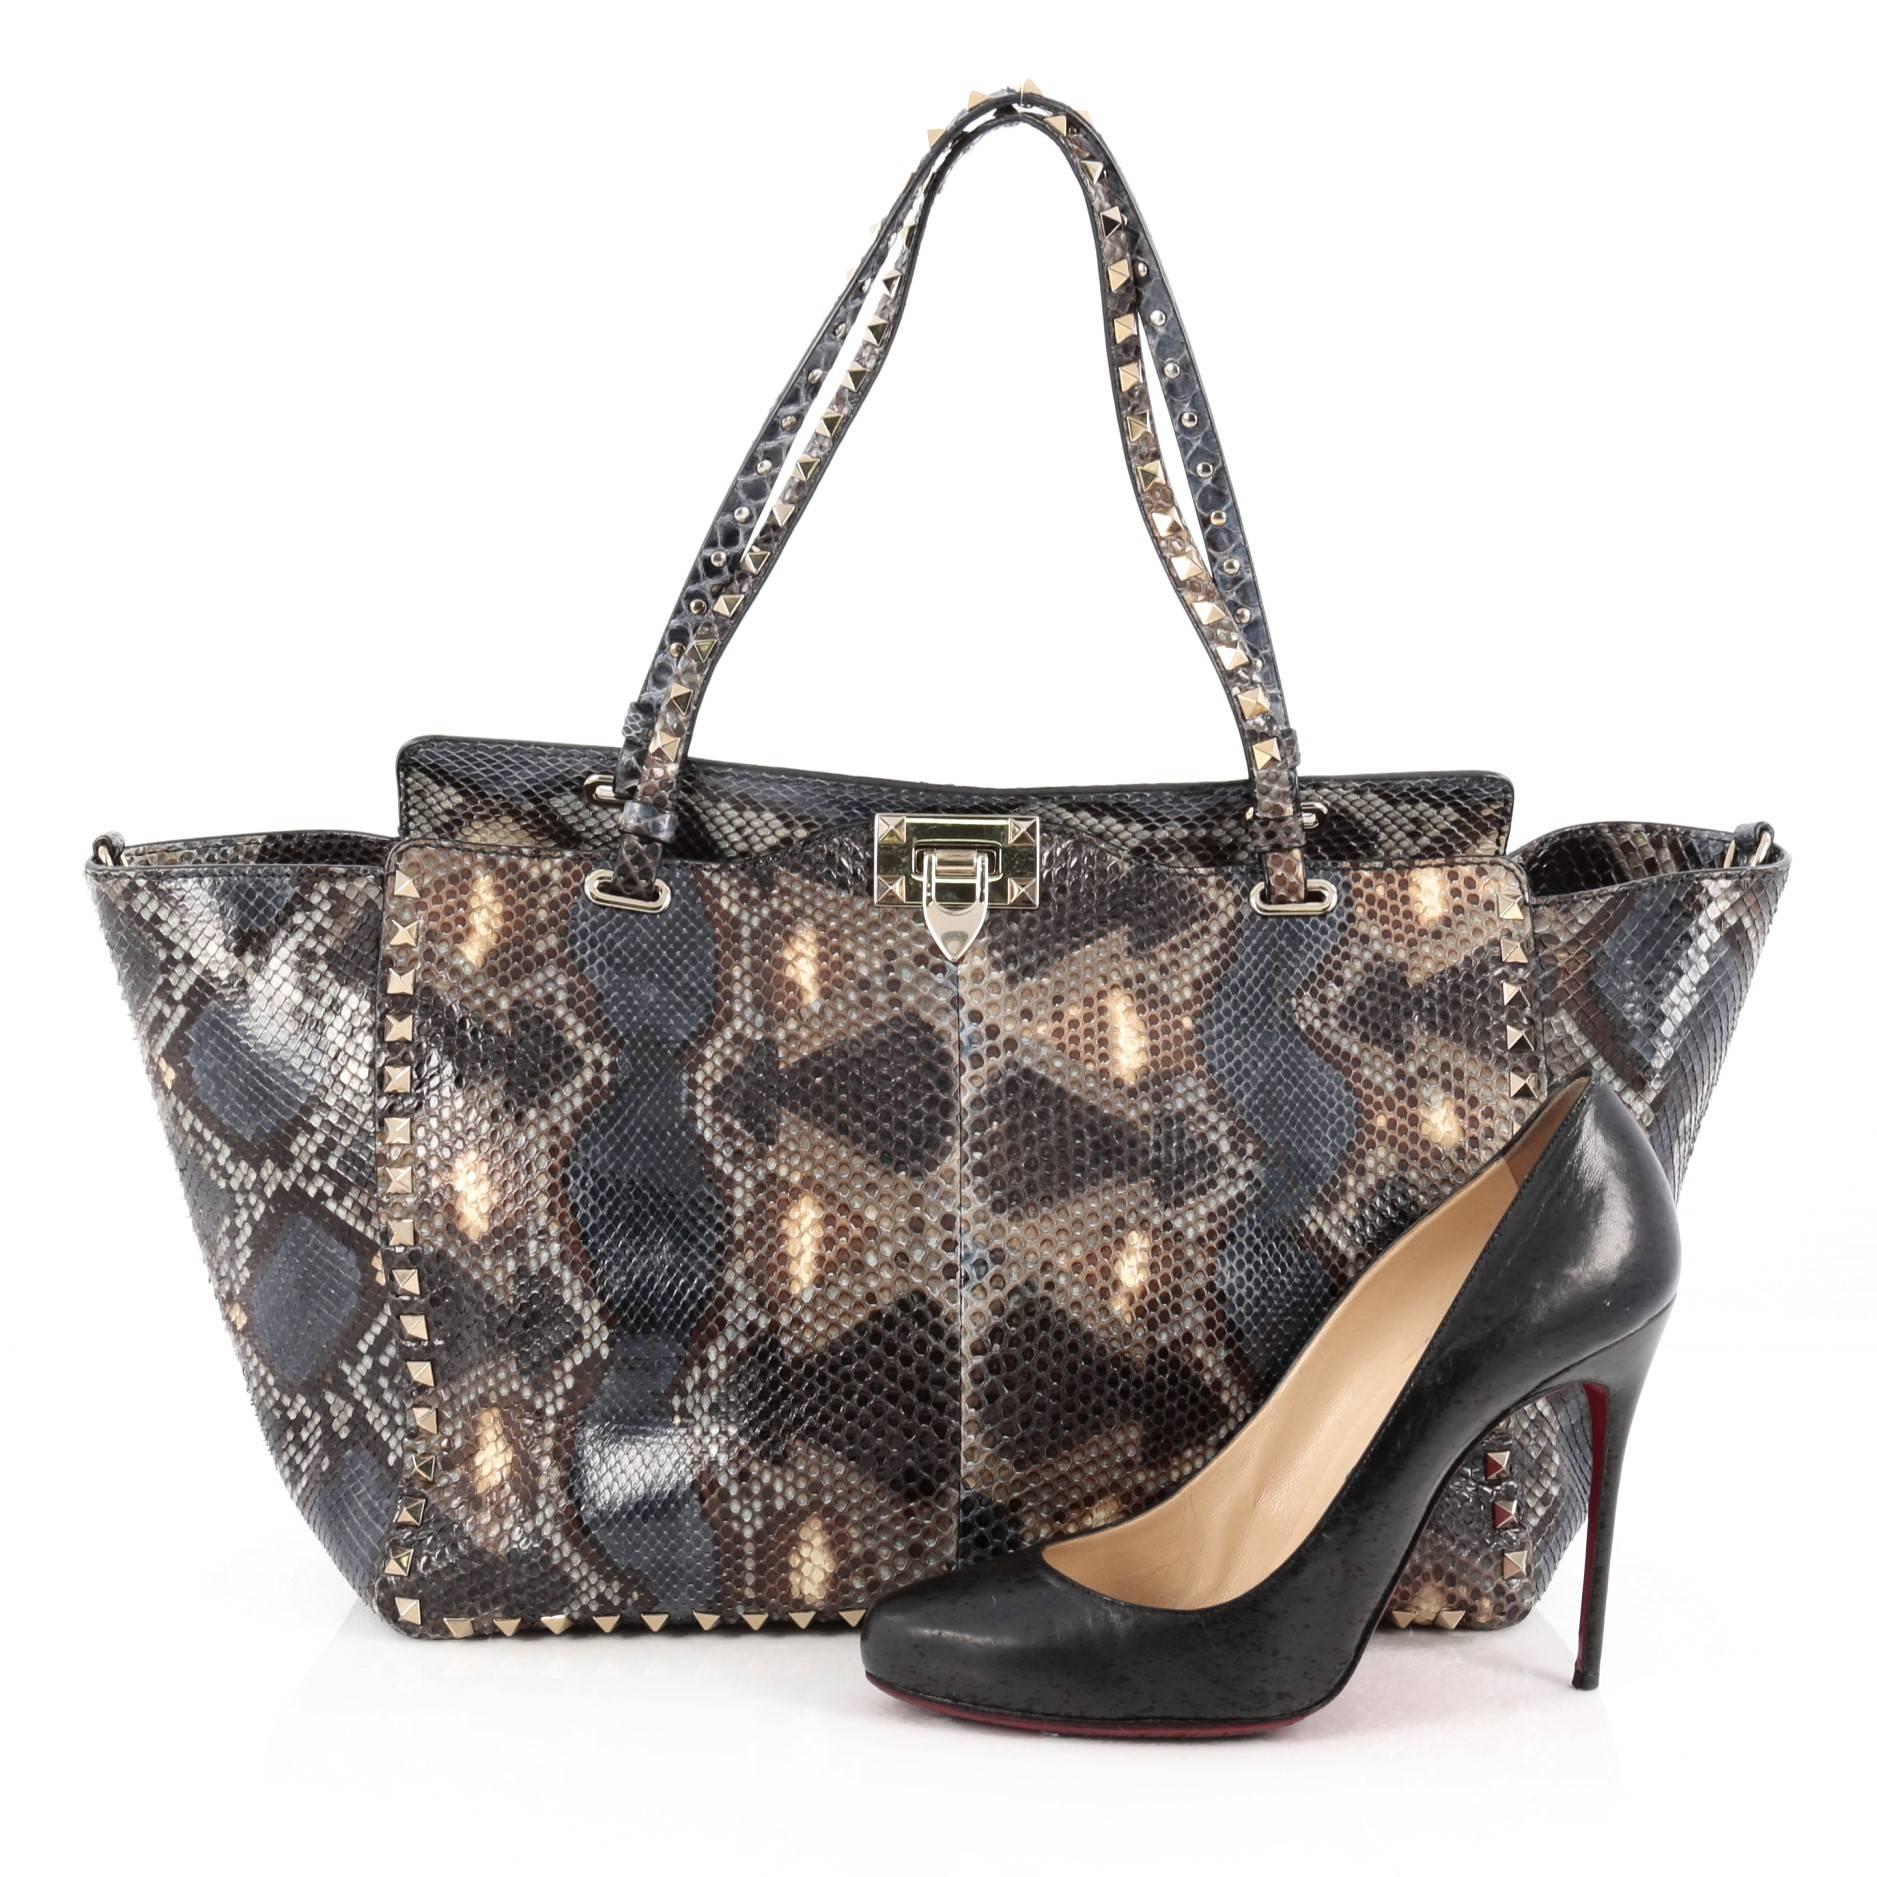 This authentic Valentino Rockstud Tote Python Large is a stylish and iconic bag that is one of today's most sought-after styles. Crafted from genuine multicolor python, this chic tote features tall dual-flat handles, gold-tone pyramid stud trim